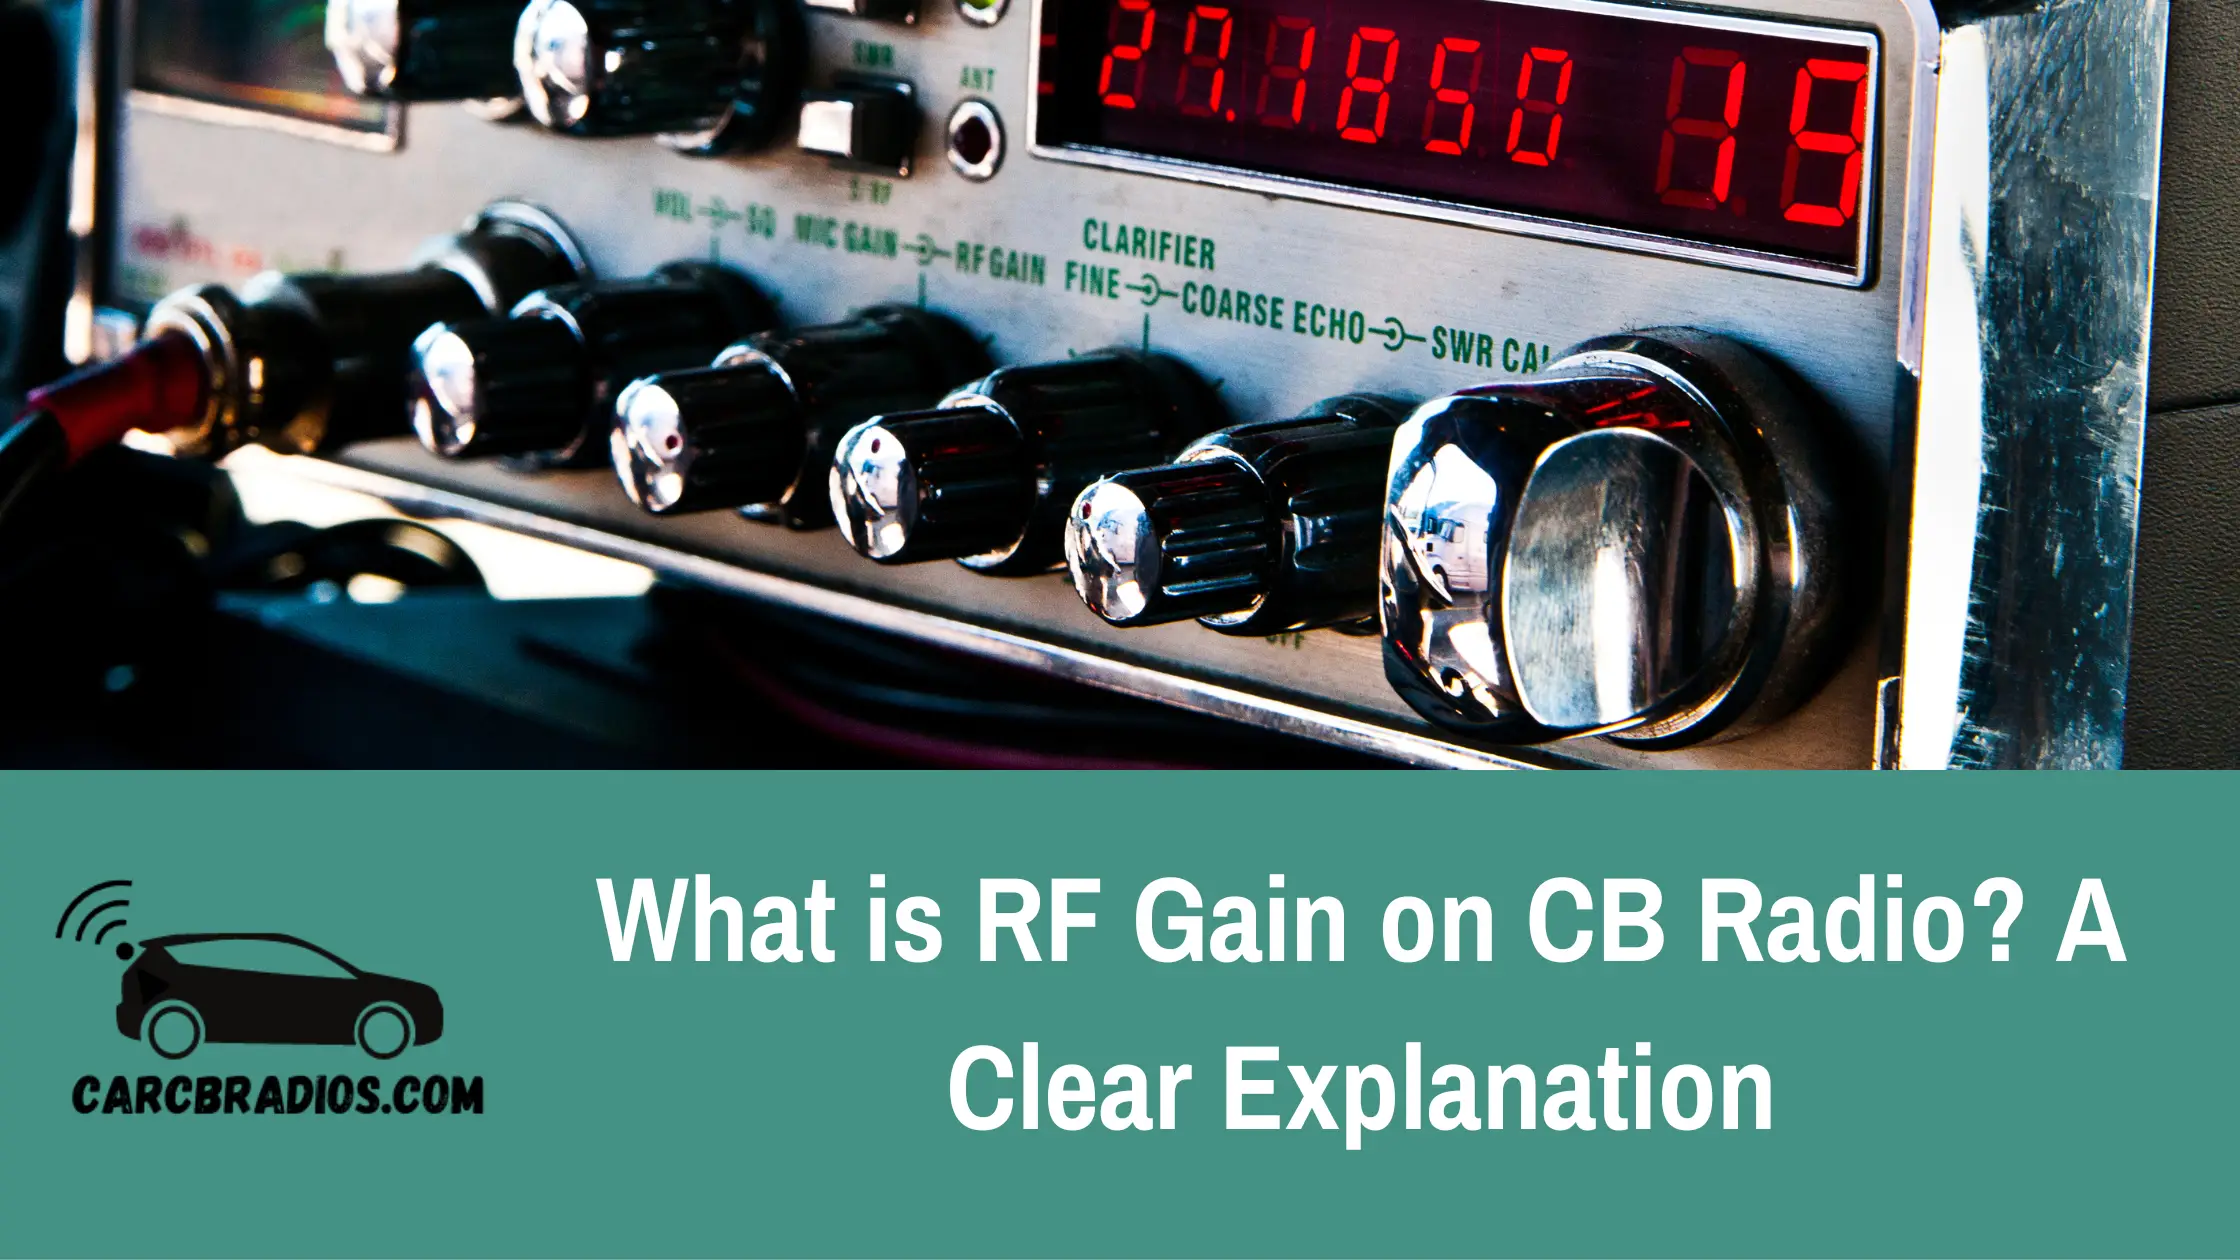 RF Gain is a feature on a CB radio that acts as a sensitivity filter to reduce noise in the receiver without reducing reception power. It is used to counteract noise that interferes with signals, which comes from the atmosphere, other nearby channels, and environmental surroundings. RF stands for "radio frequency," which refers to the wireless communication of signals through the air rather than through wires. Unlike a CB radio squelch, RF gain does not reduce reception power while reducing noise in the receiver.